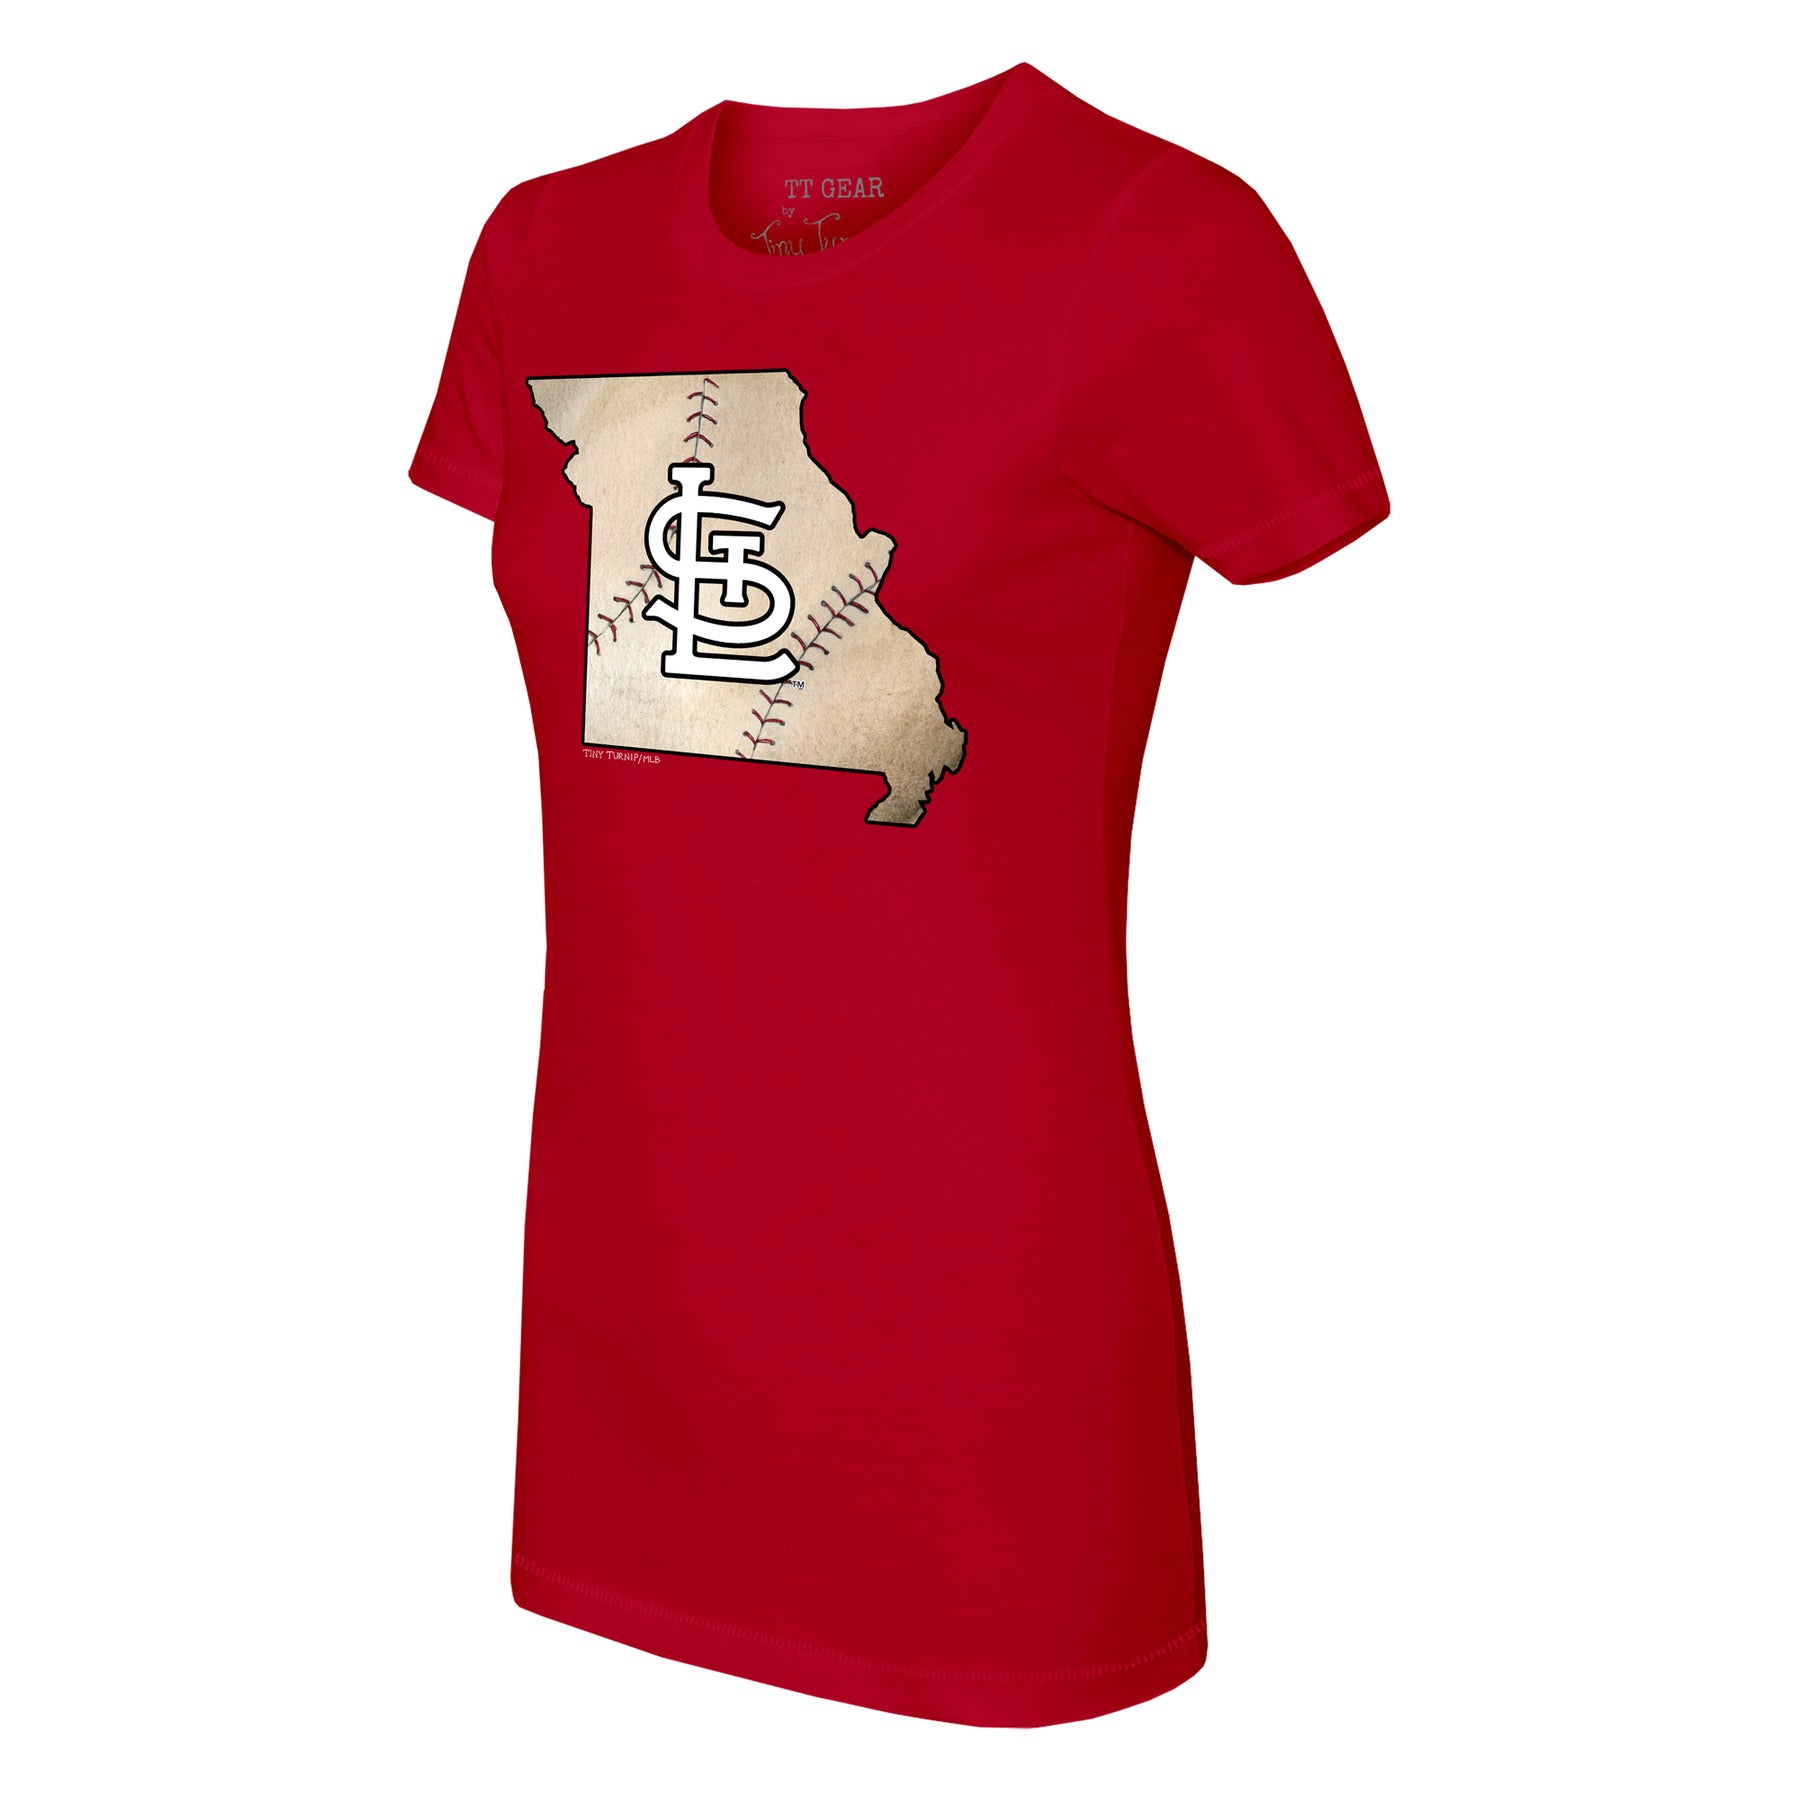 Infant Tiny Turnip White St. Louis Cardinals State Outline T-Shirt